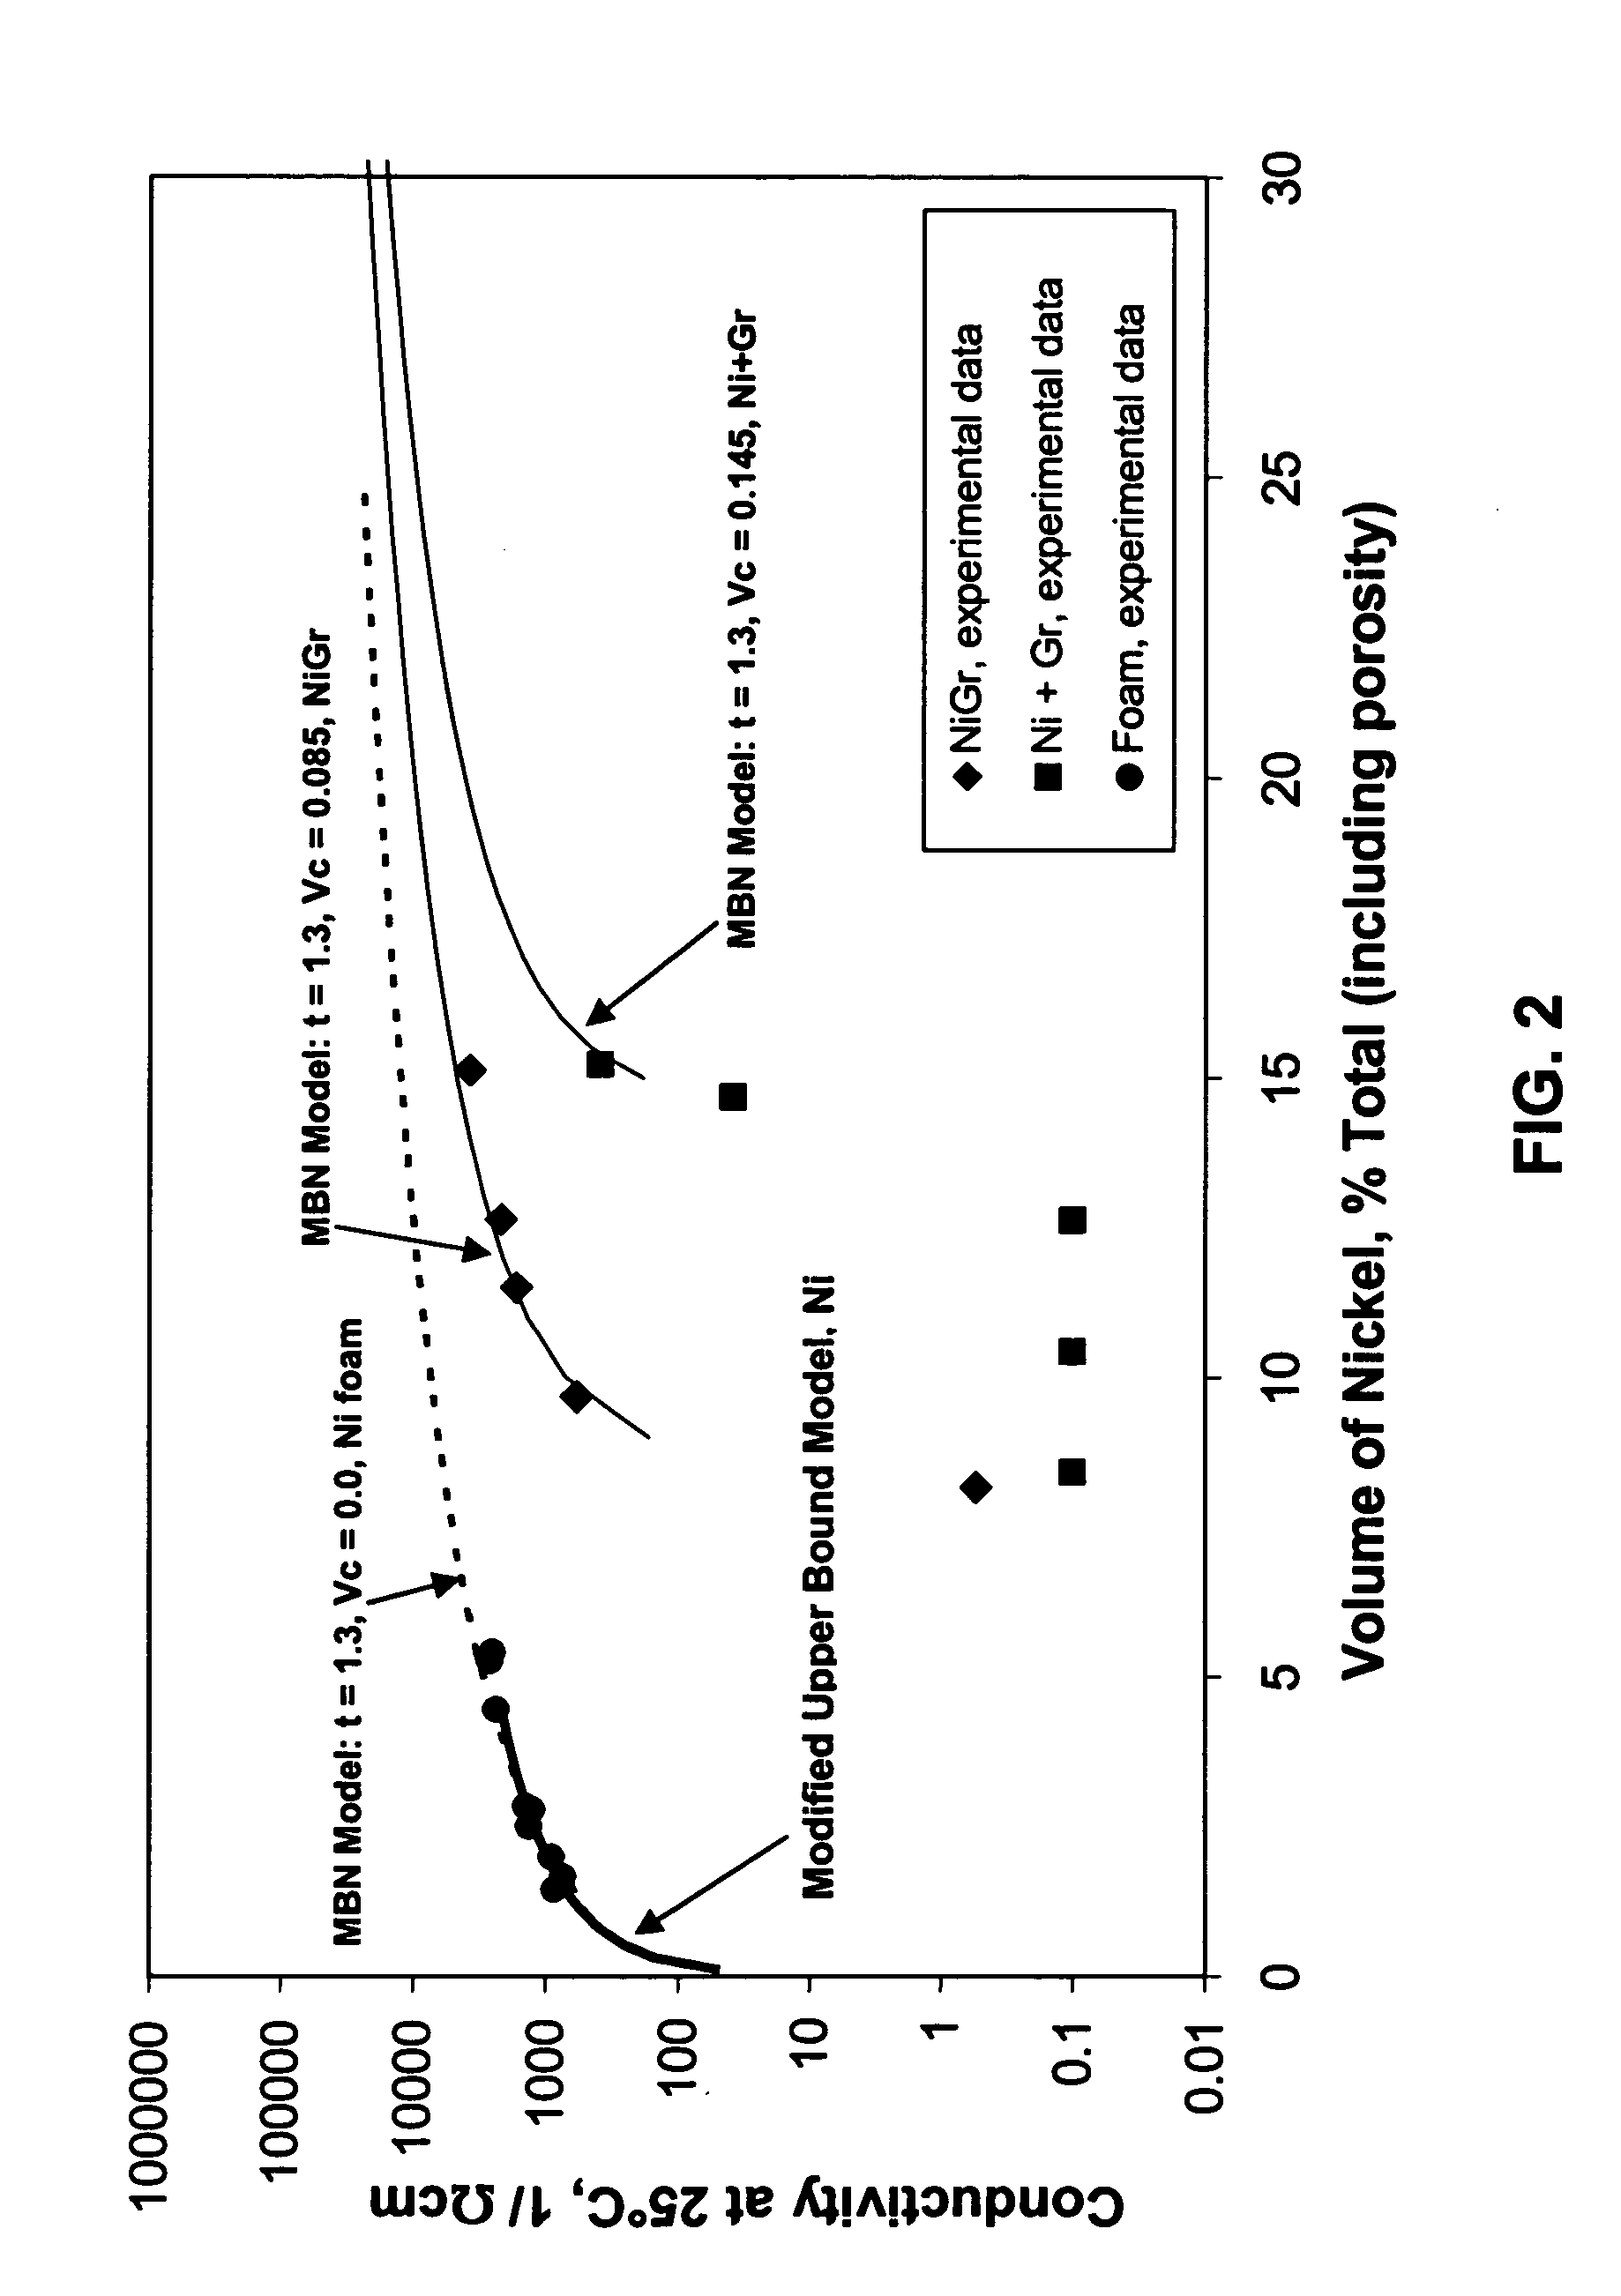 Nickel foam and felt-based anode for solid oxide fuel cells